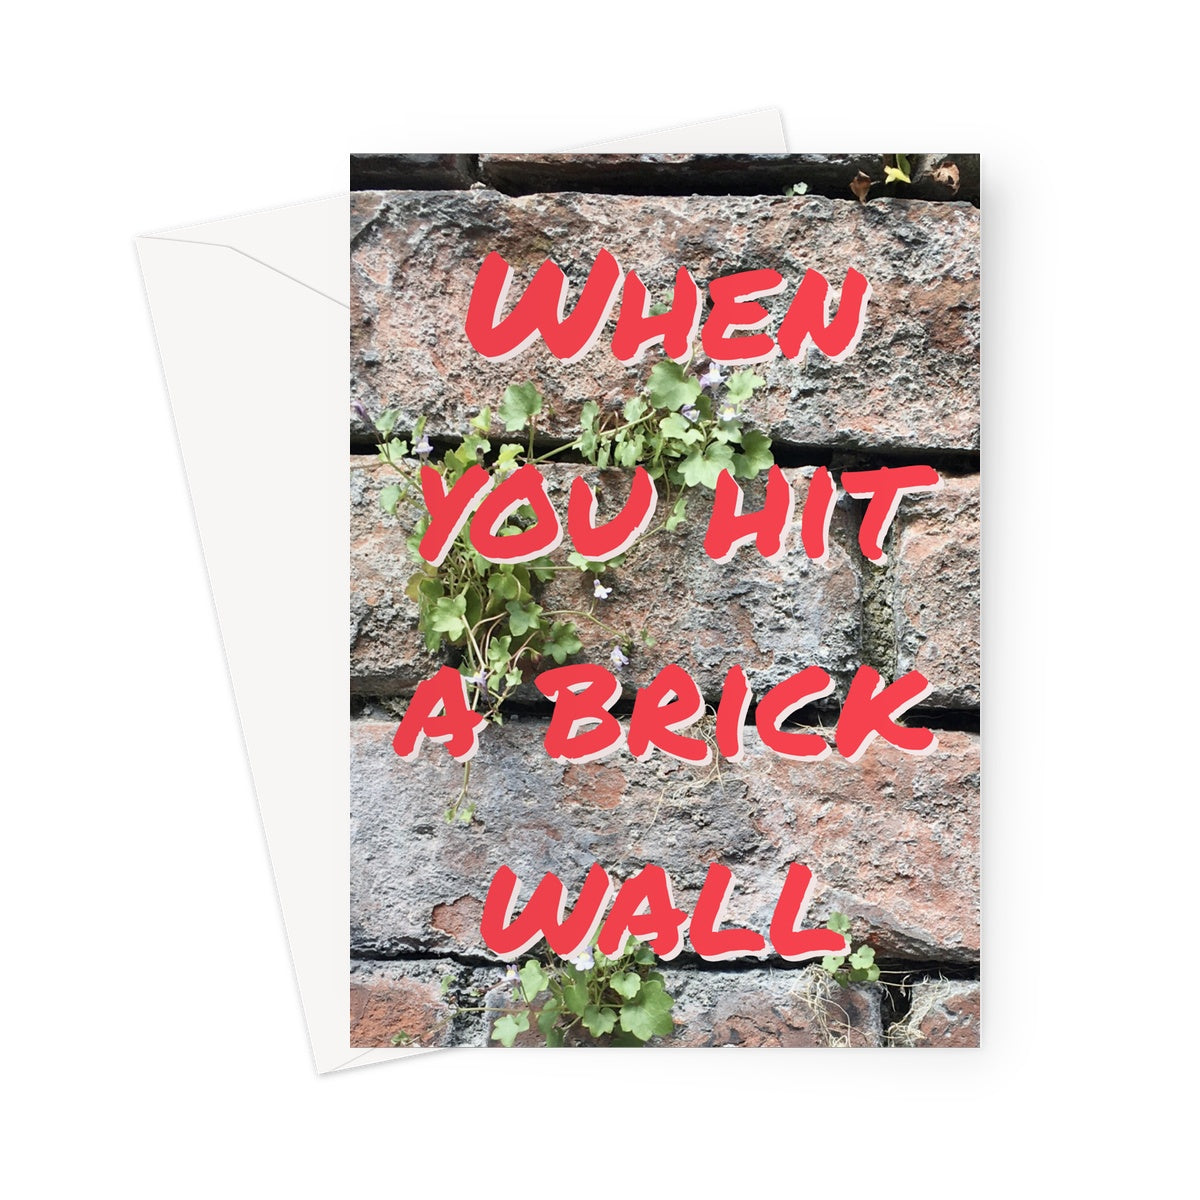 This greeting card shows the words "When you hit a brick wall" in red in front of a closeup of old bricks.